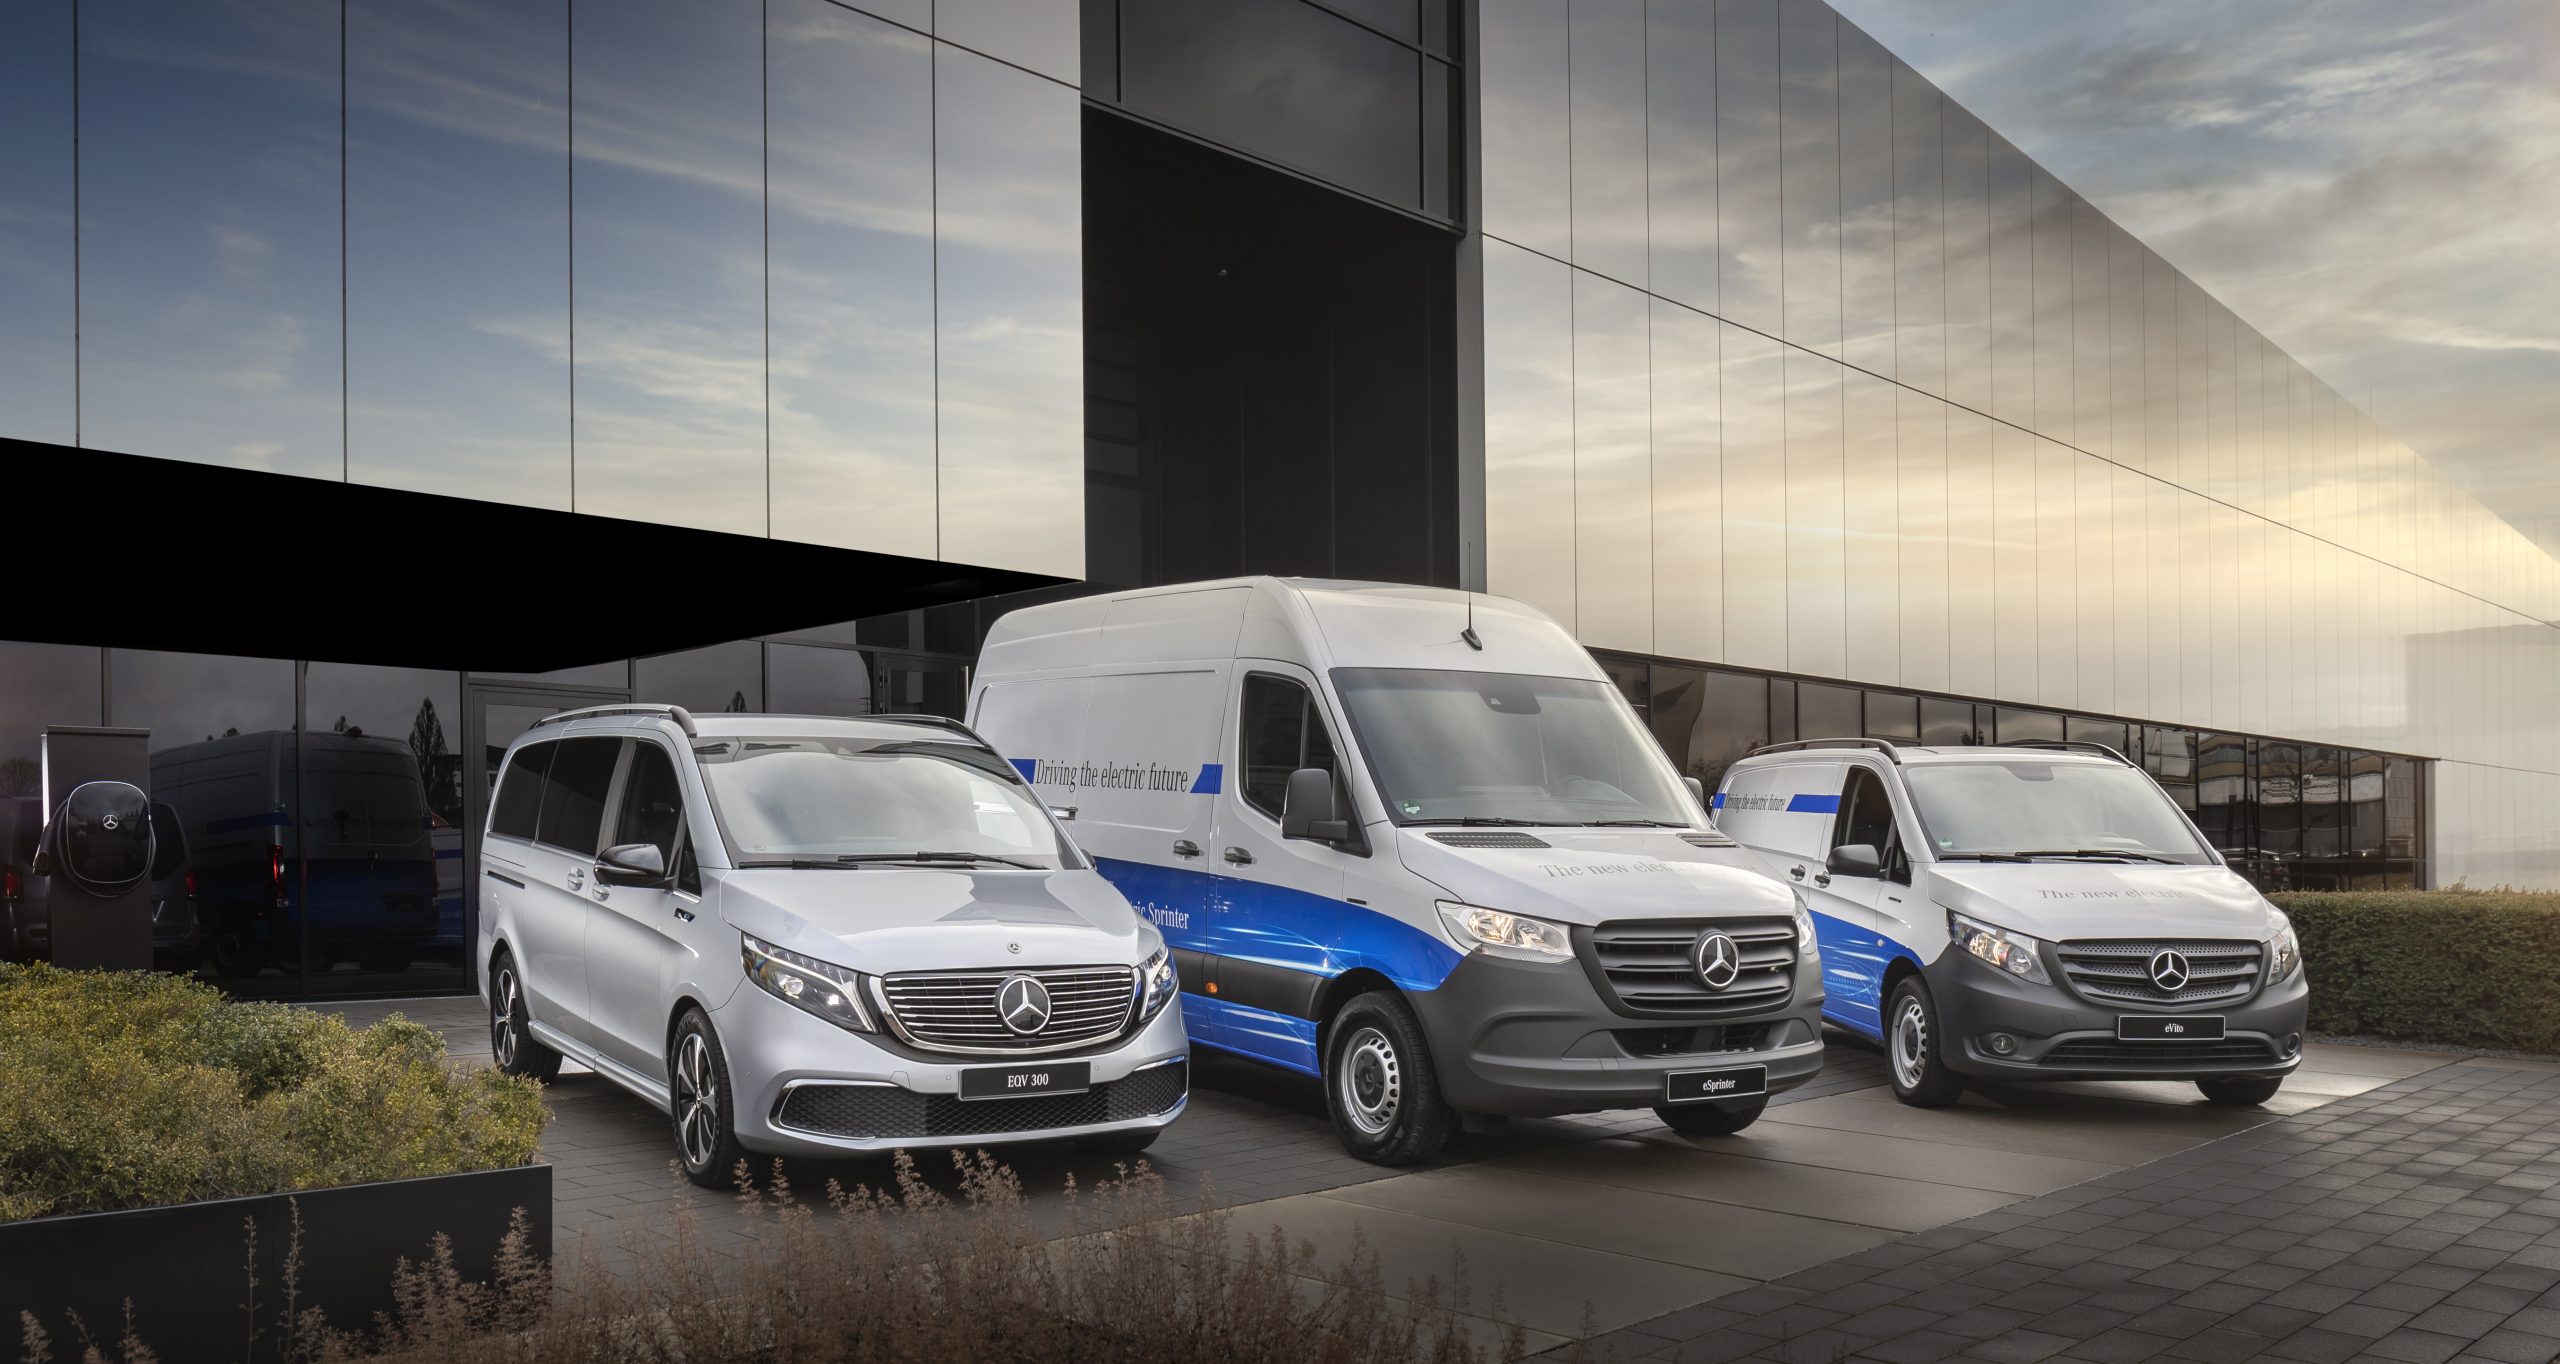 Mercedes-Benz EQV (combined electrical consumption: 26.4-26.3 kWh/100 km; combined CO2 emissions: 0 g/km), eSprinter, eVito;Combined electrical consumption: 26.4-26.3 kWh/100 km; combined CO2 emissions: 0 g/km*